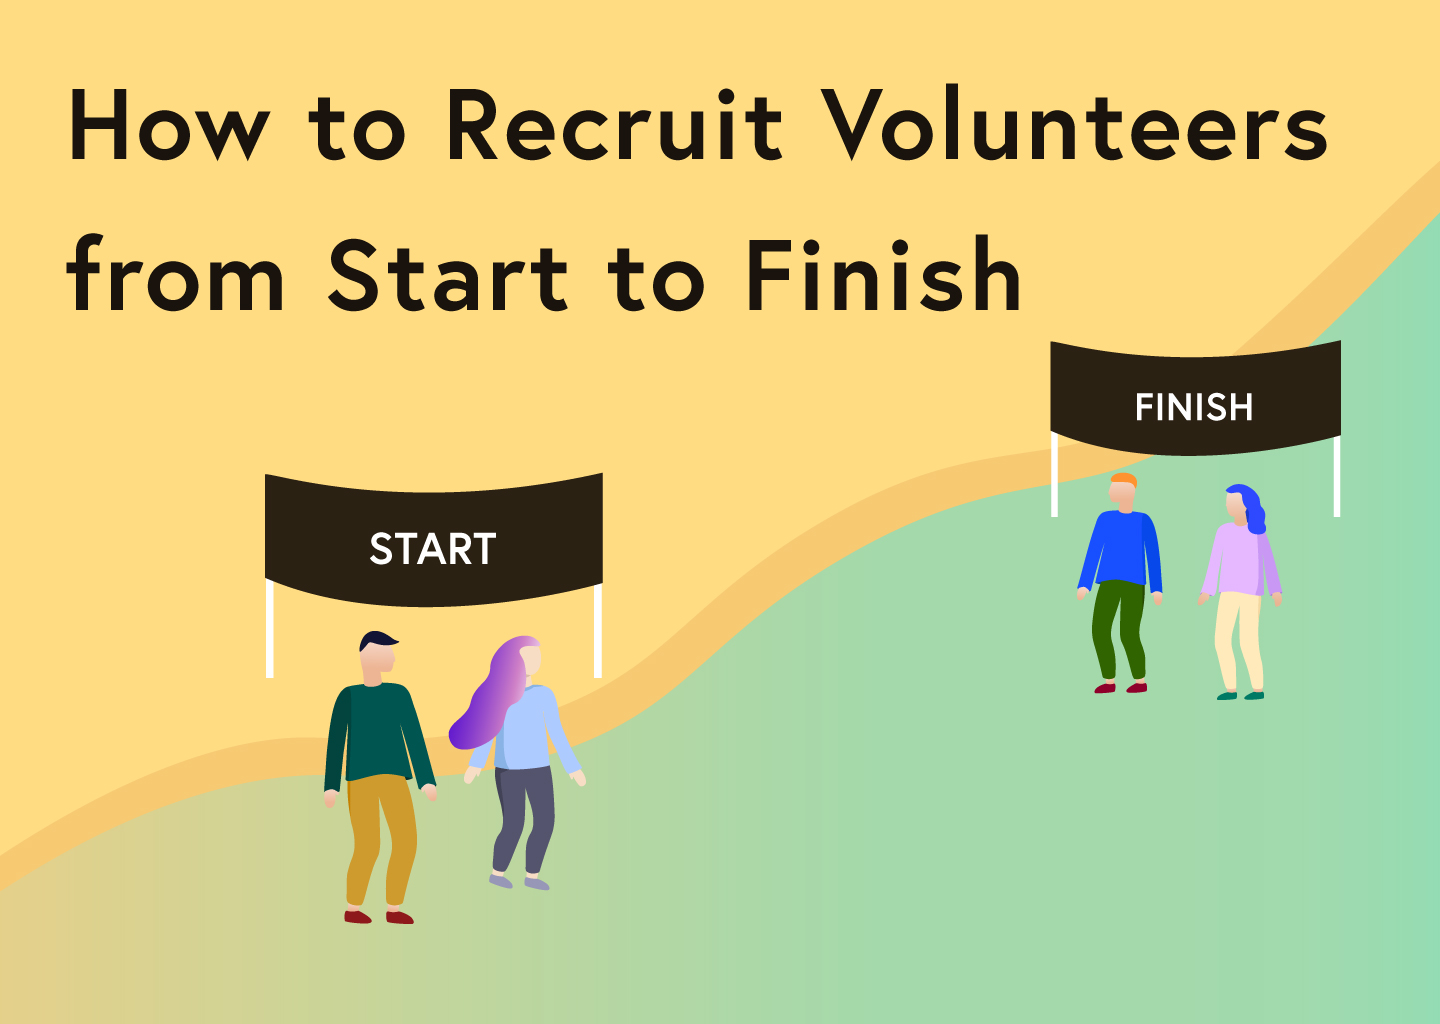 How to Recruit Volunteers from Start to Finish